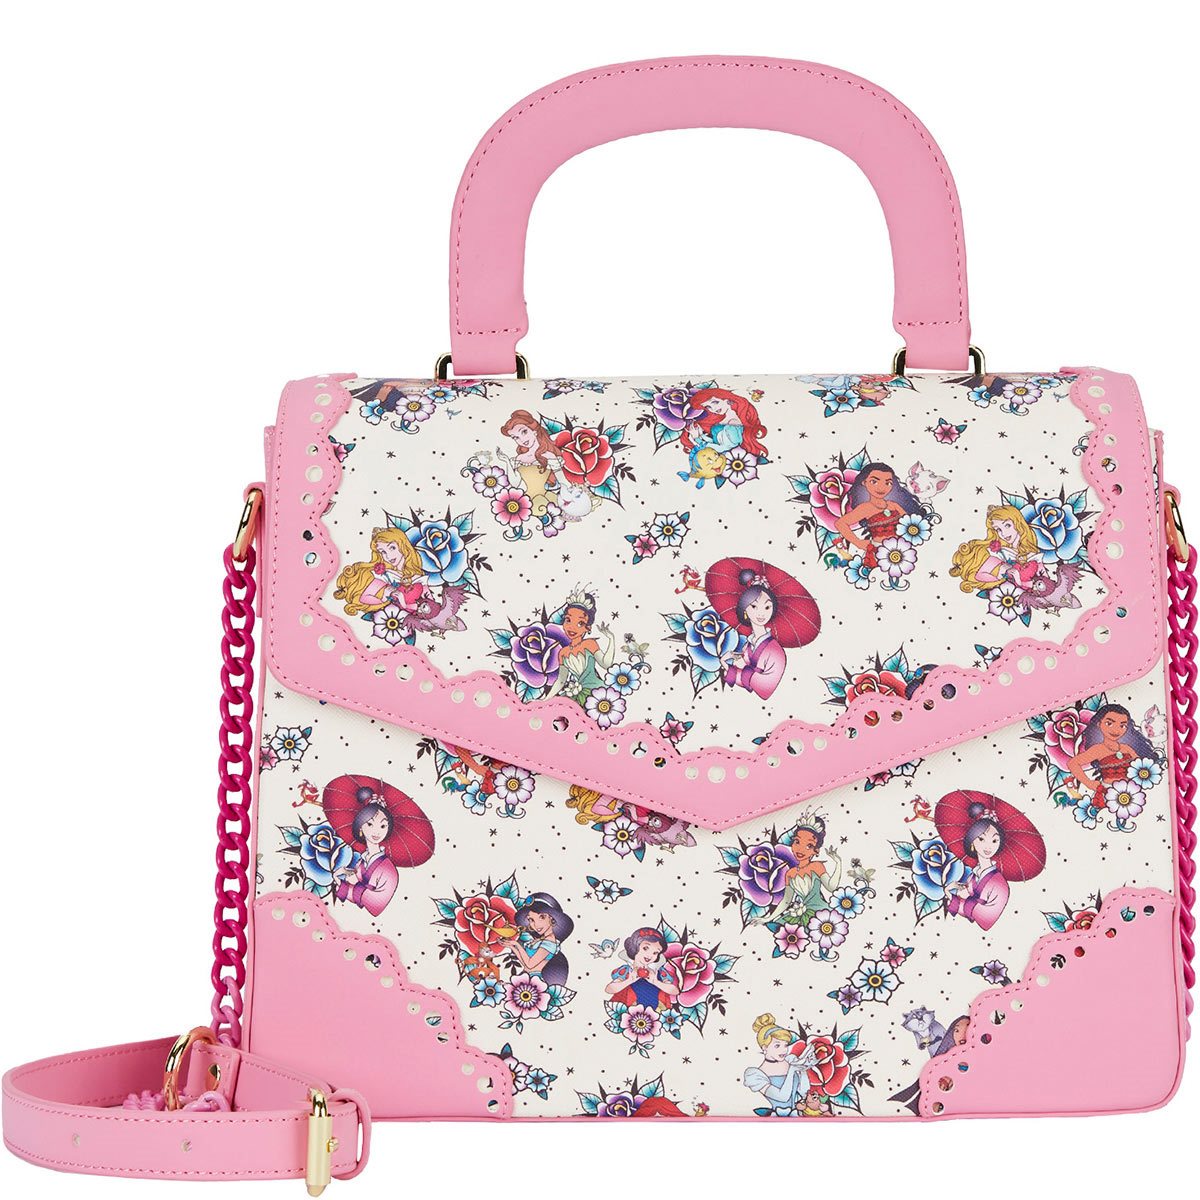 3 new Disney Princess bags from Loungefly - Disney Diary